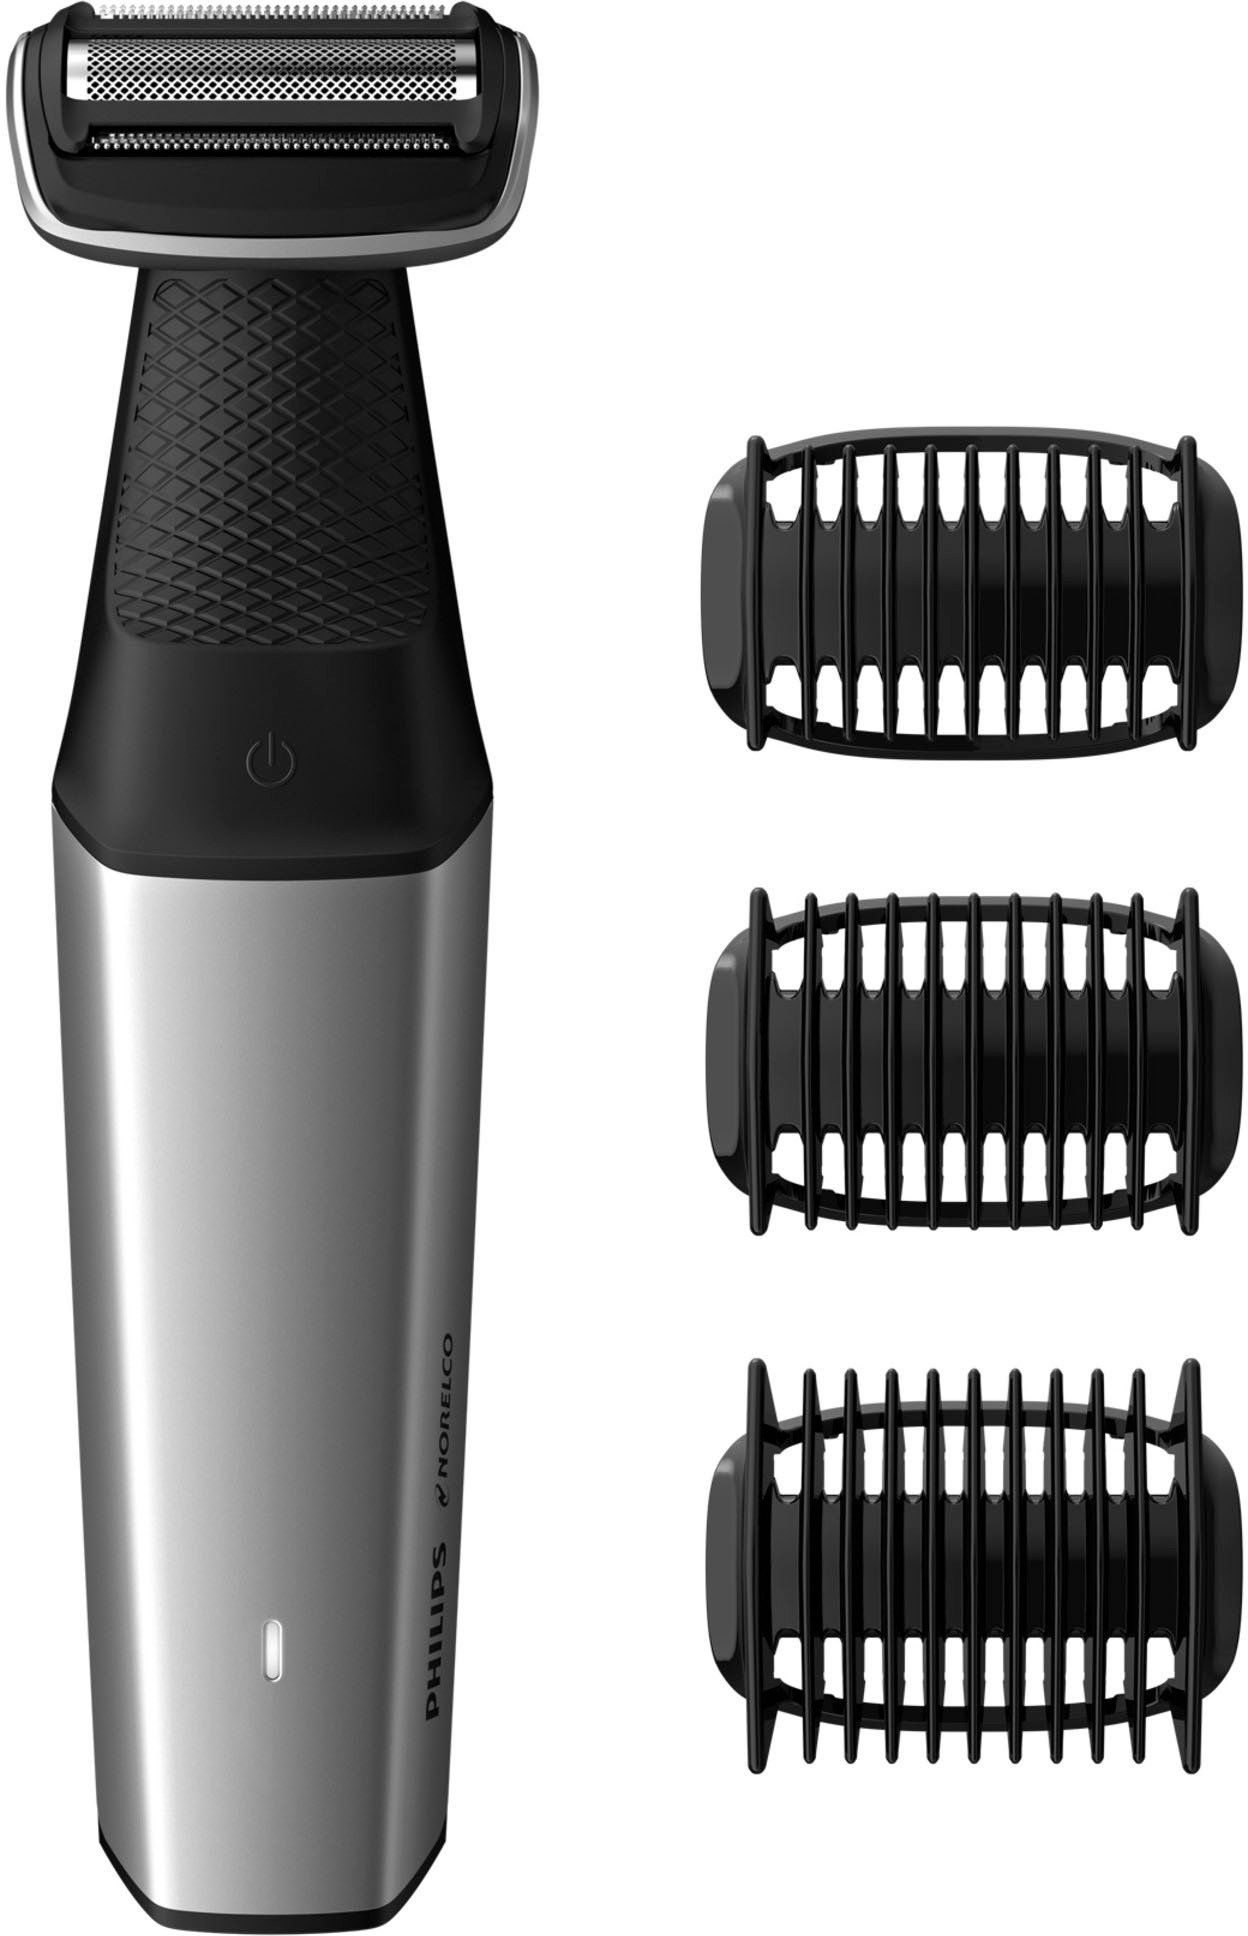 Angle View: Philips Norelco - Bodygroom Series 5000 for Manscaping - Silver